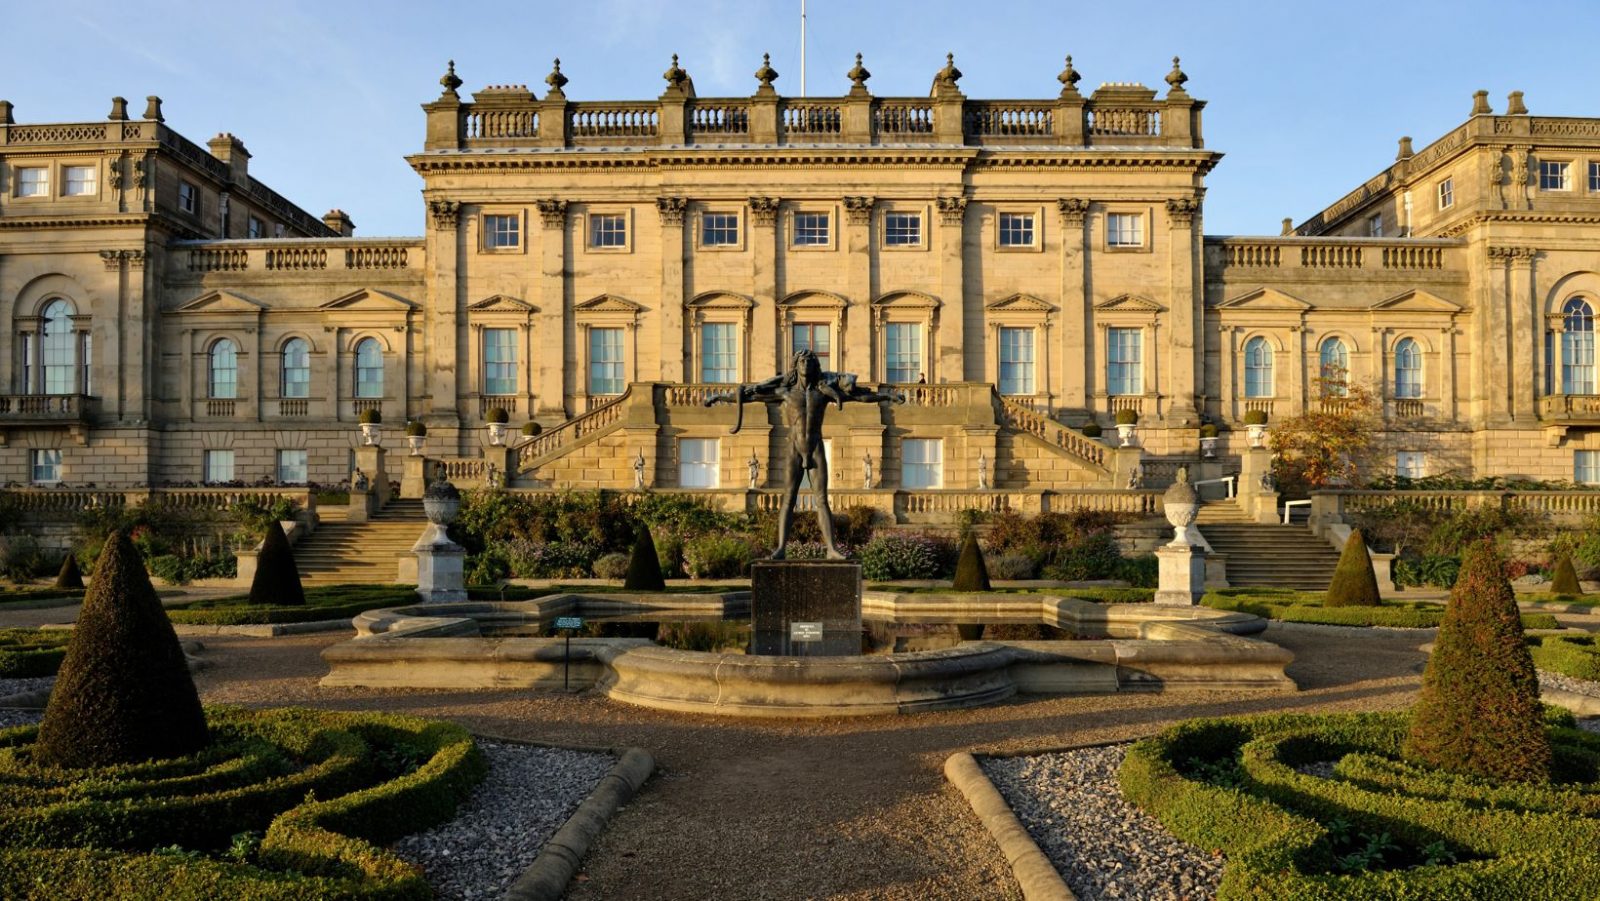 The exterior of Harewood House. 